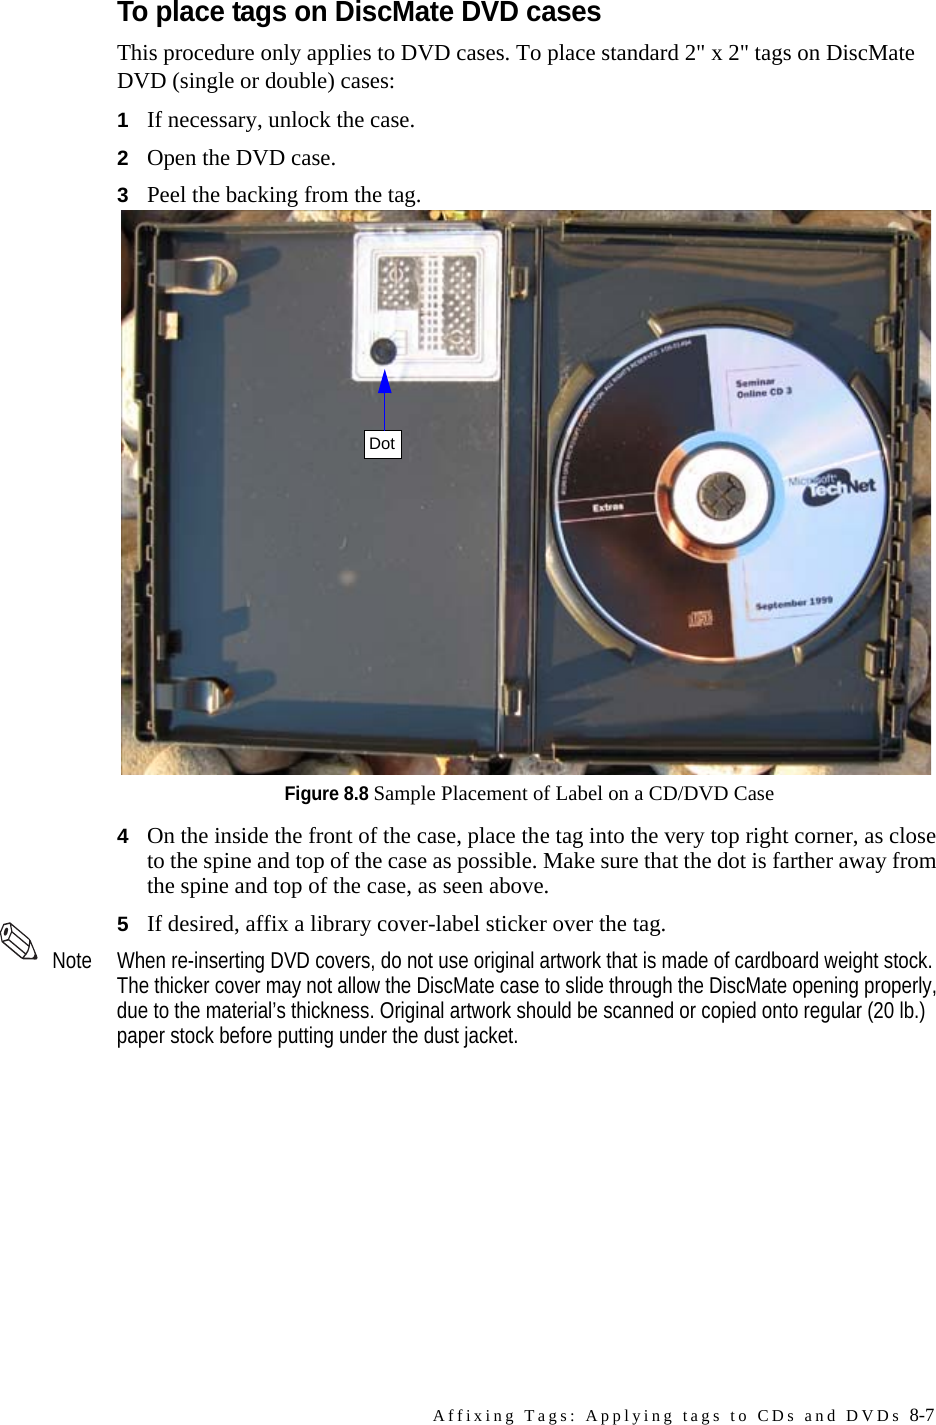 Affixing Tags: Applying tags to CDs and DVDs 8-7To place tags on DiscMate DVD casesThis procedure only applies to DVD cases. To place standard 2&quot; x 2&quot; tags on DiscMate DVD (single or double) cases:1If necessary, unlock the case. 2Open the DVD case.3Peel the backing from the tag.Figure 8.8 Sample Placement of Label on a CD/DVD Case4On the inside the front of the case, place the tag into the very top right corner, as close to the spine and top of the case as possible. Make sure that the dot is farther away from the spine and top of the case, as seen above.5If desired, affix a library cover-label sticker over the tag. Note When re-inserting DVD covers, do not use original artwork that is made of cardboard weight stock. The thicker cover may not allow the DiscMate case to slide through the DiscMate opening properly, due to the material’s thickness. Original artwork should be scanned or copied onto regular (20 lb.) paper stock before putting under the dust jacket.Dot